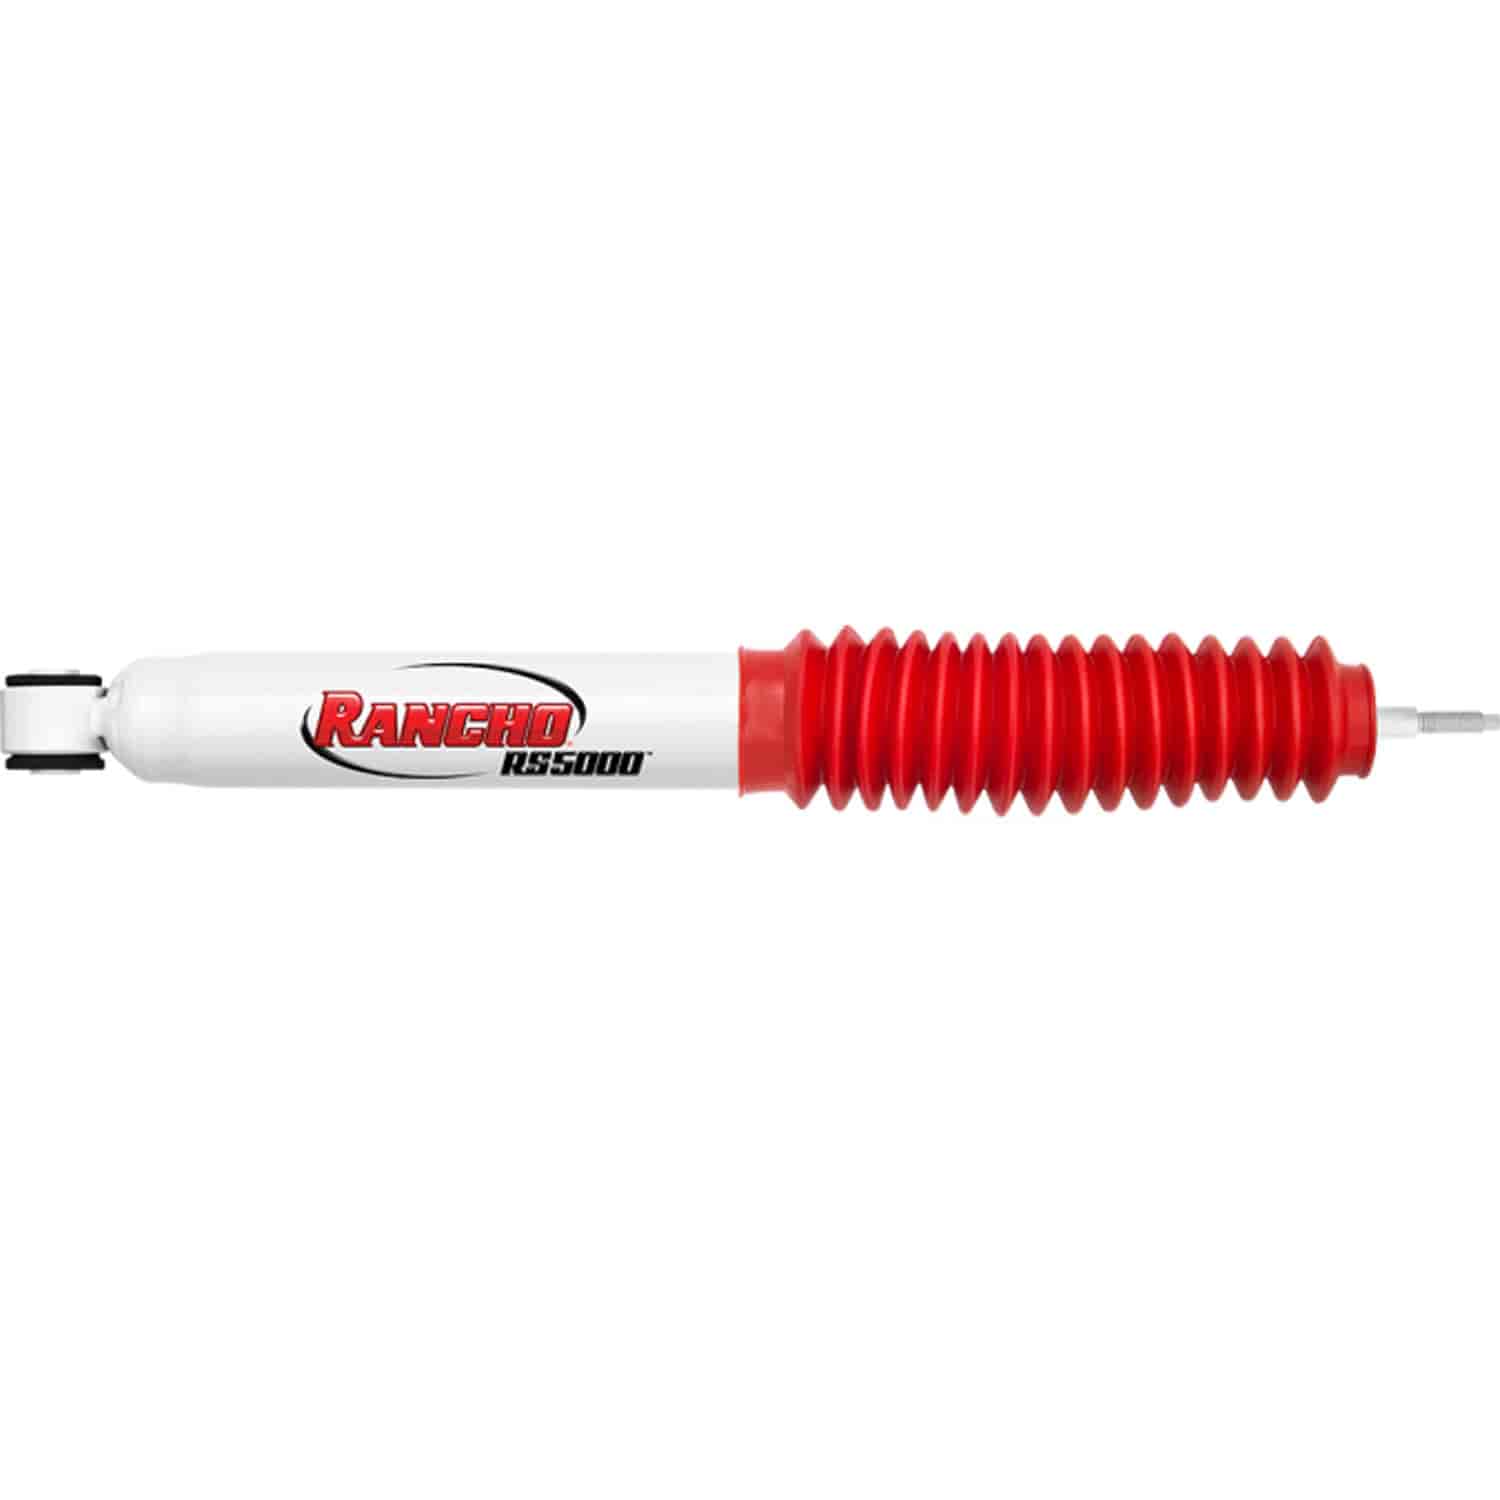 RS5000 Rear Shock Absorber Fits Mitsubishi Montero